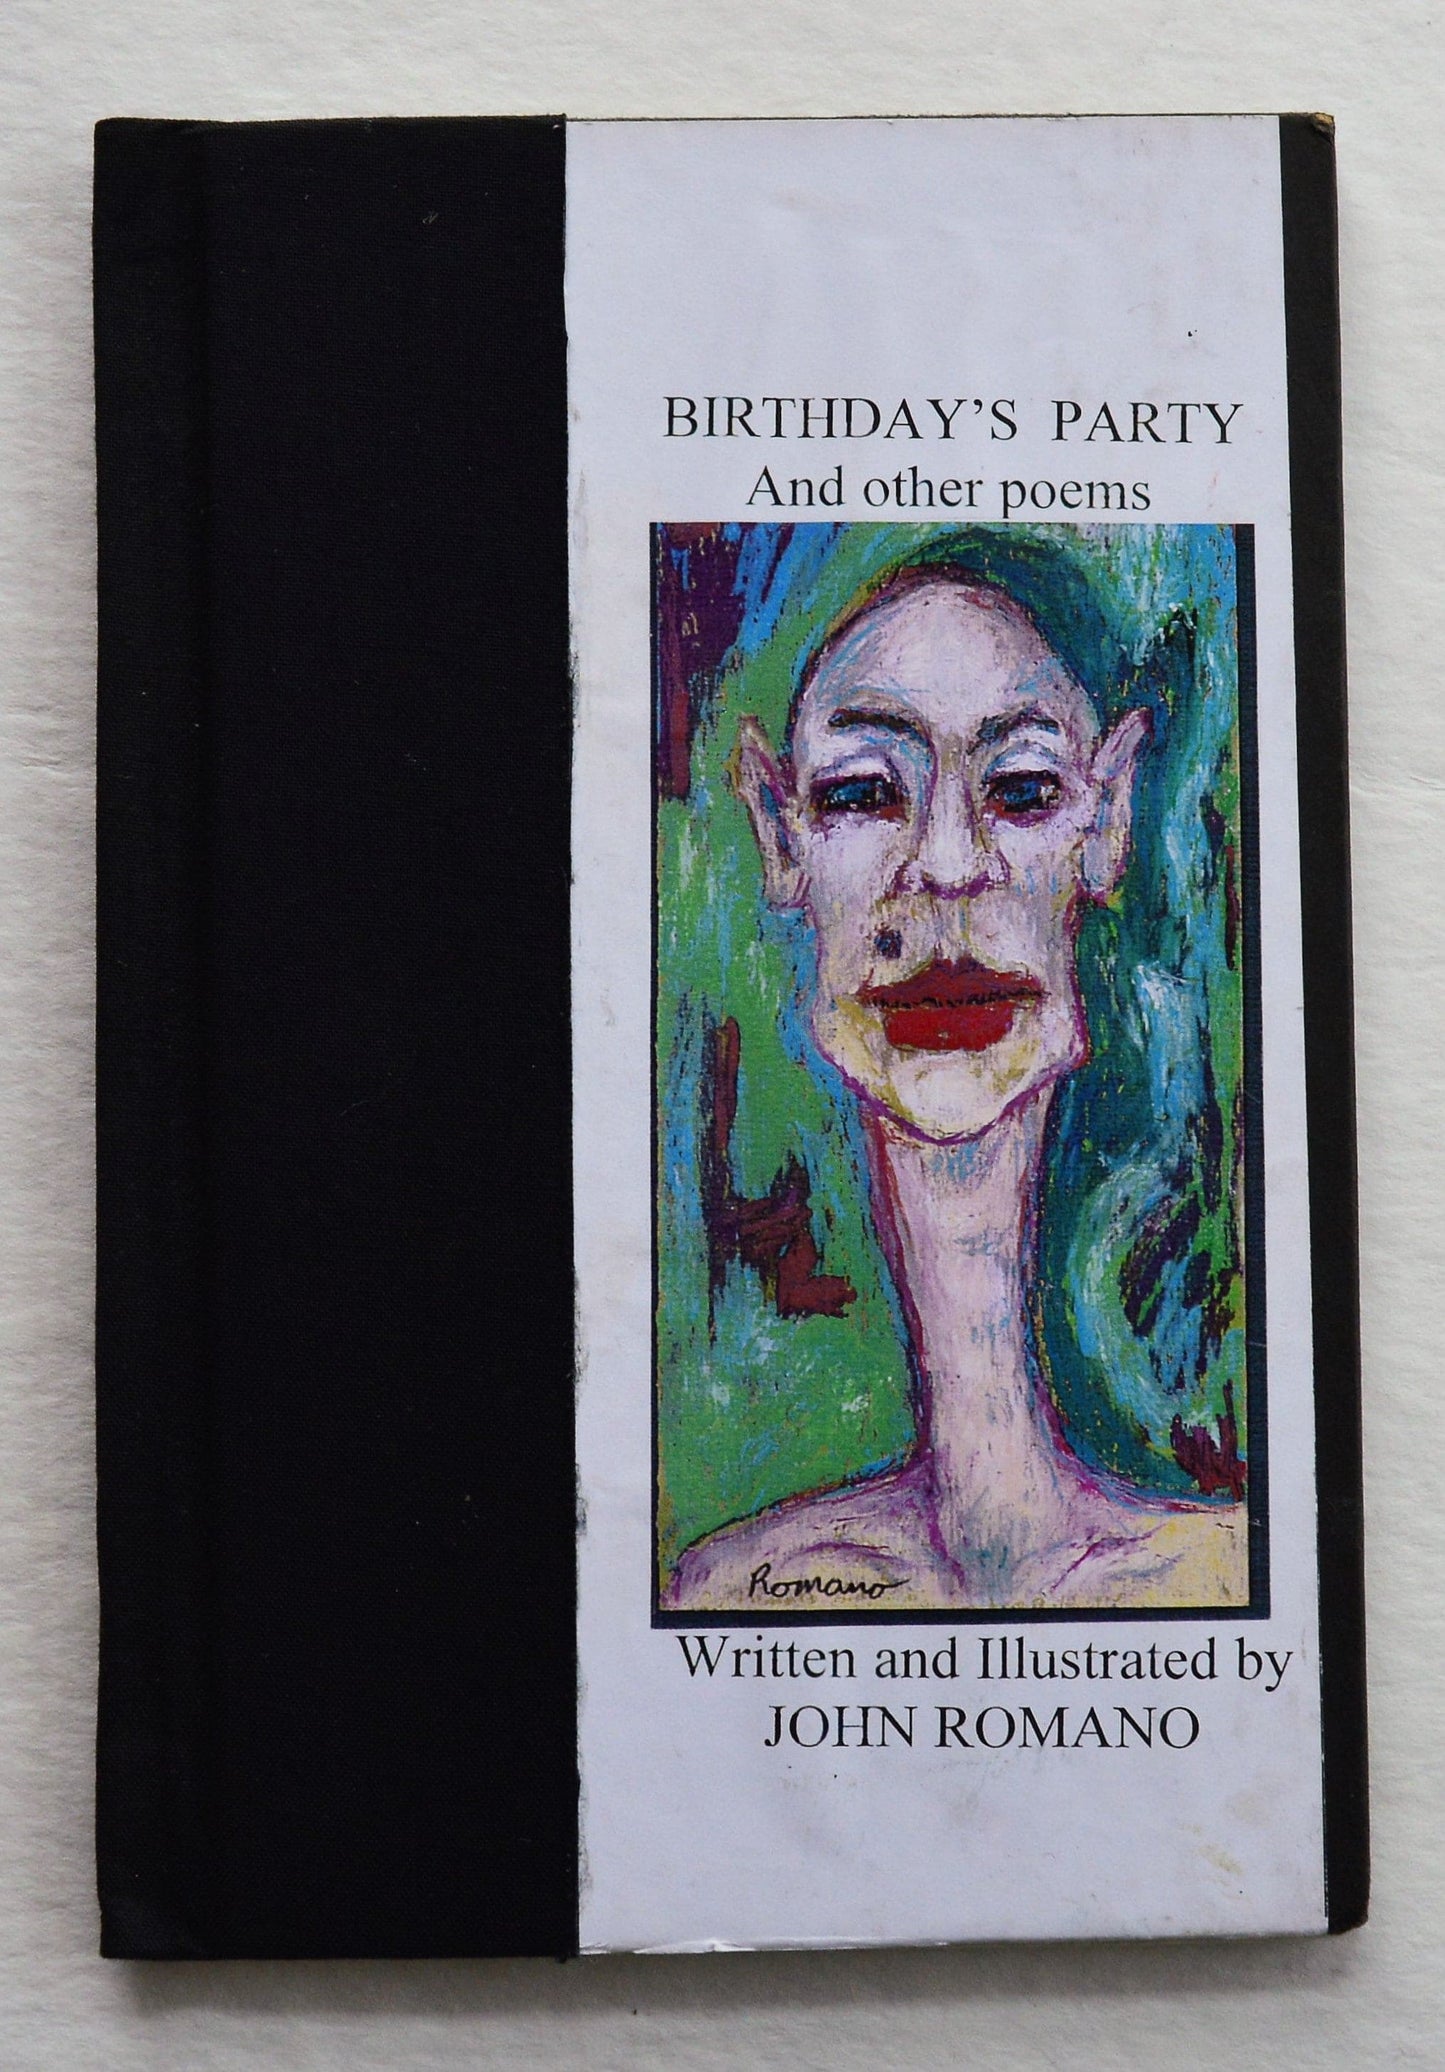 Birthday's Party and Other Poems - John Romano